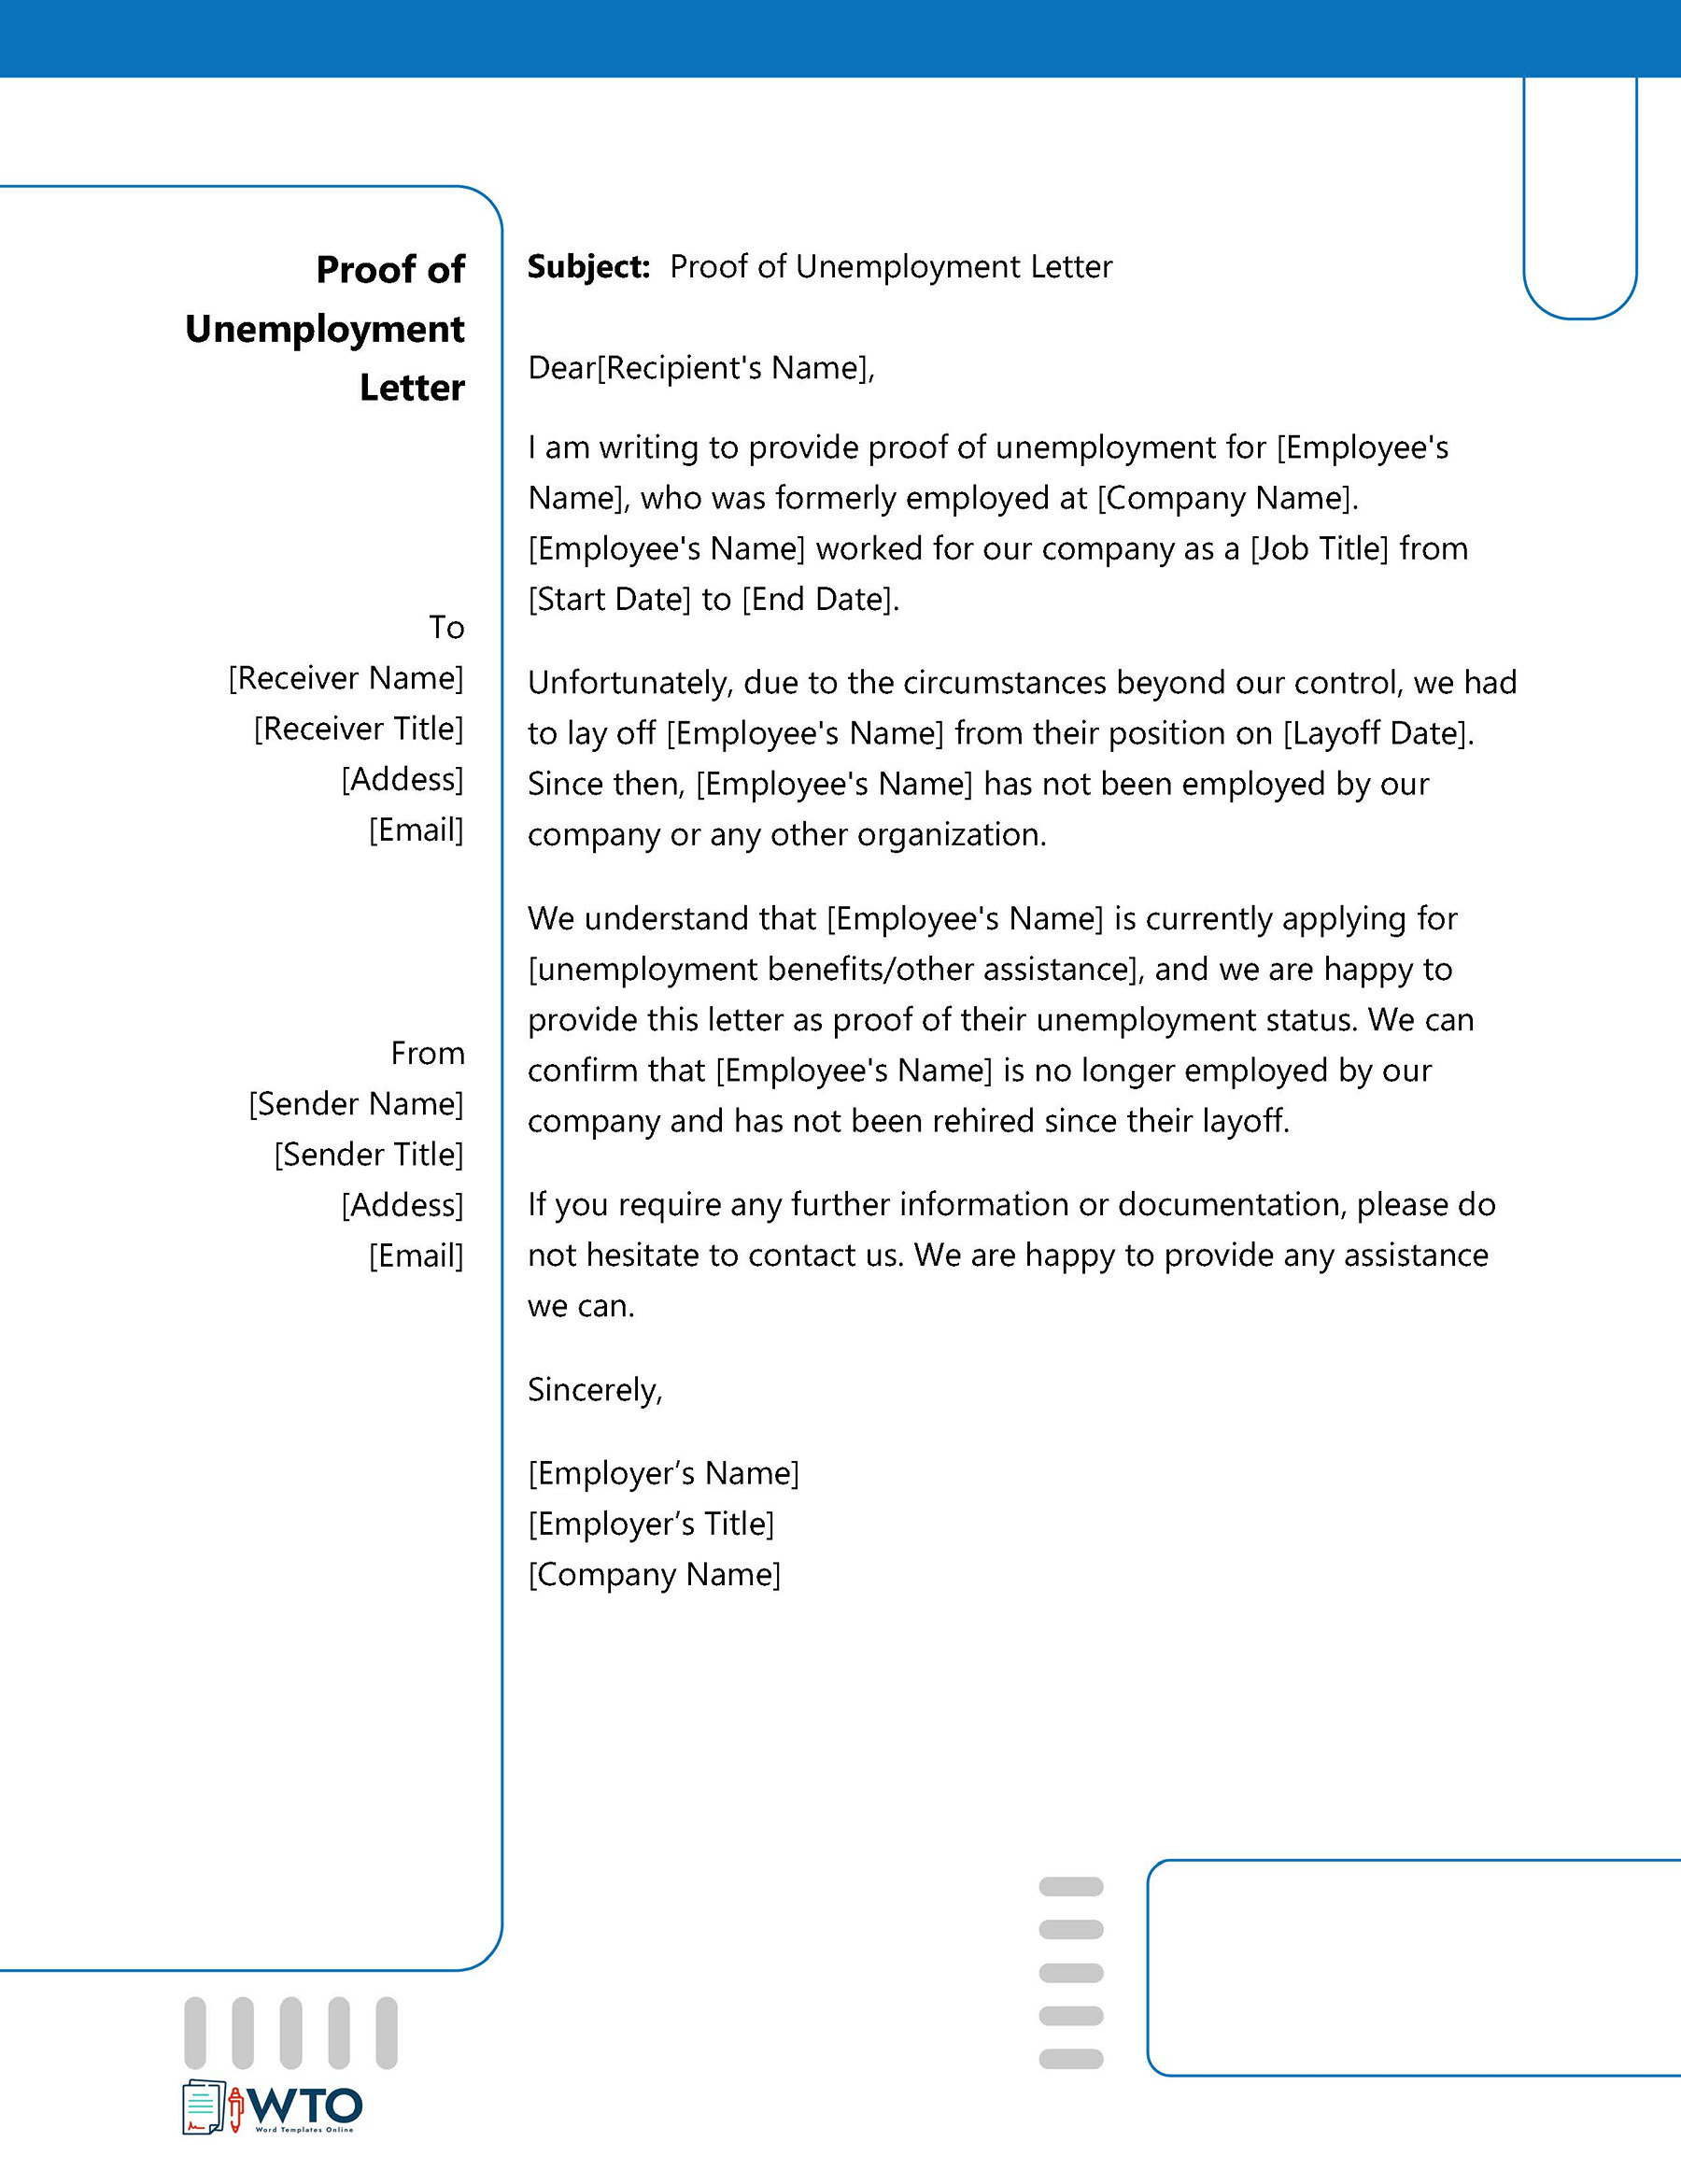 Free Proof of Unemployment Letter Template - Editable Format